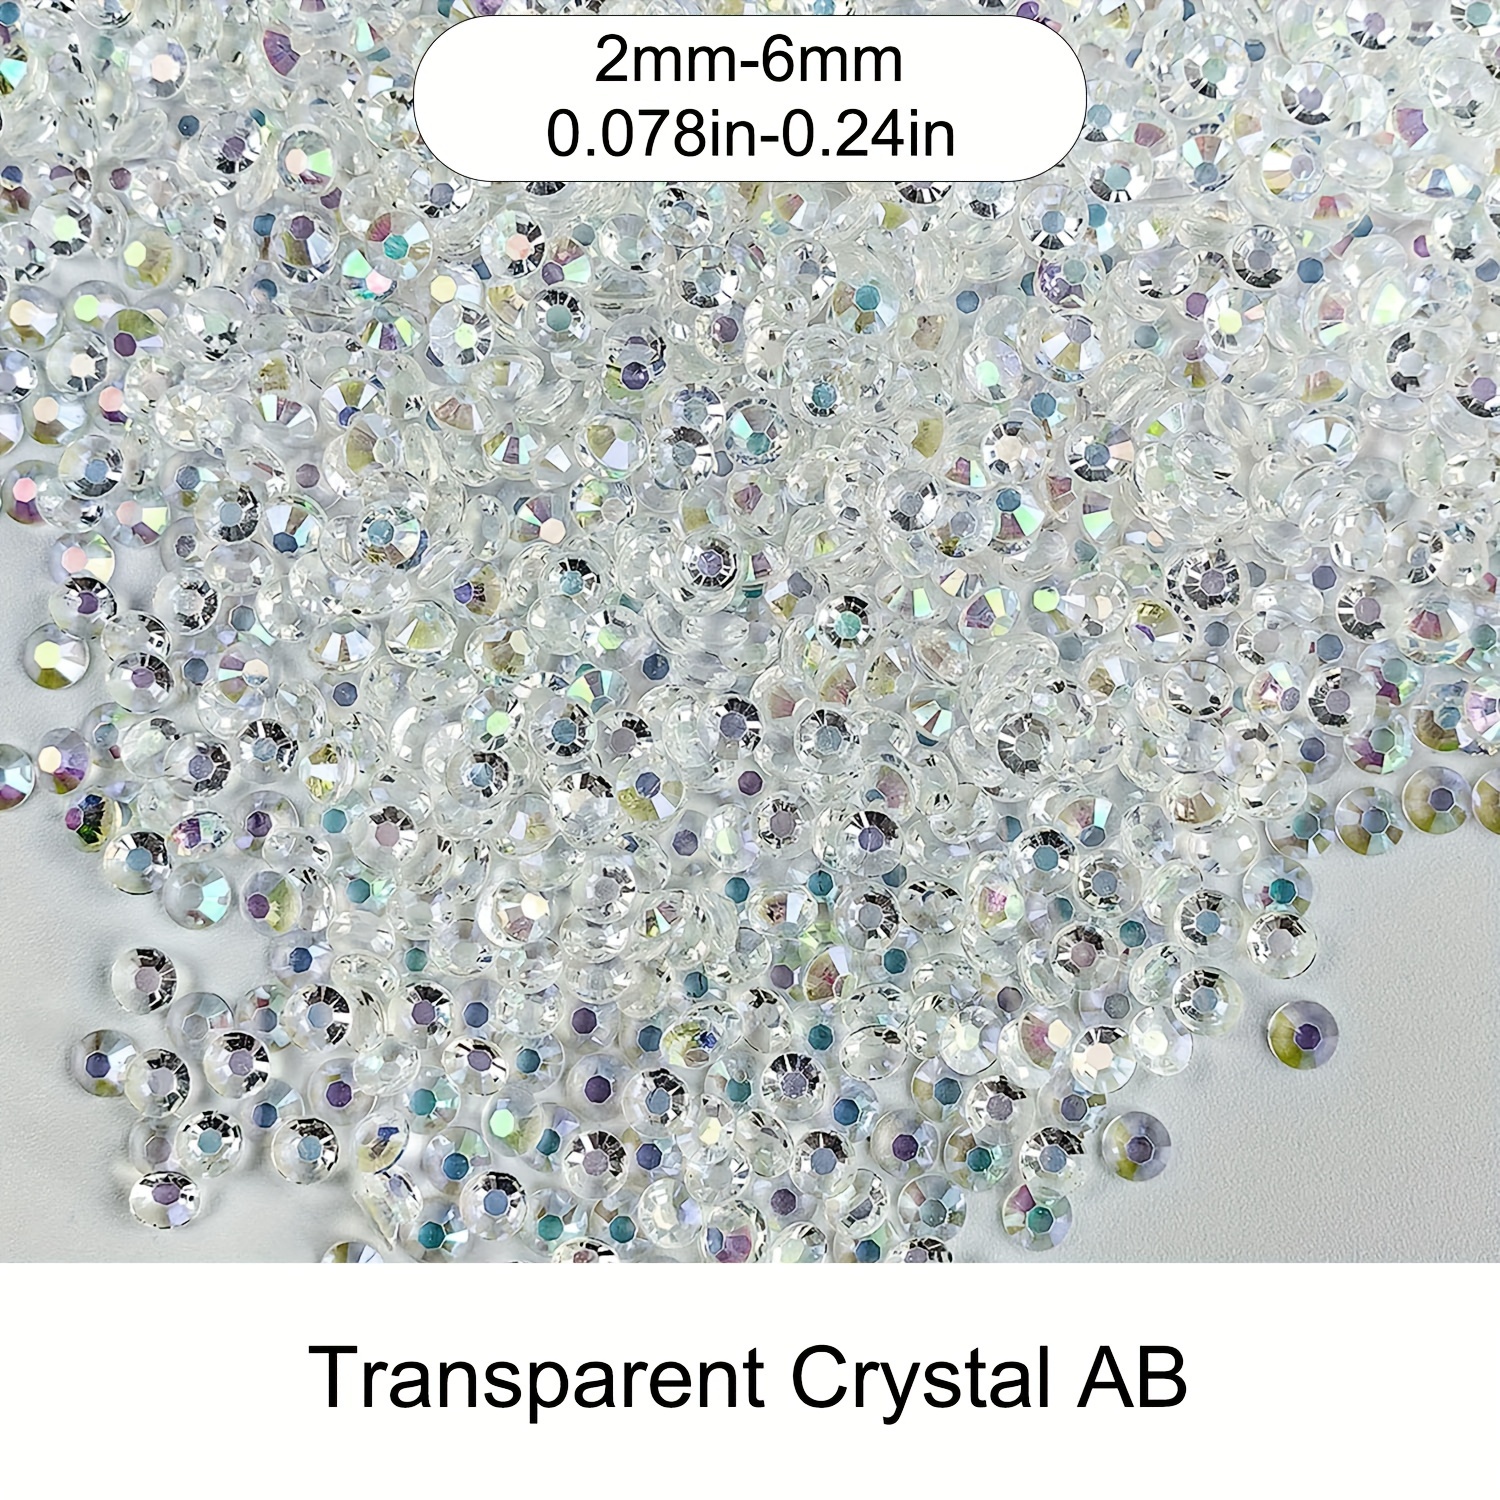 8x13mm Crystal AB Drop Transparent Ab Rhinestones For DIY Clothing And  Crafts Mix Of Color And Acrylic Strass Beads ZZ762 From Jewelry98, $6.91